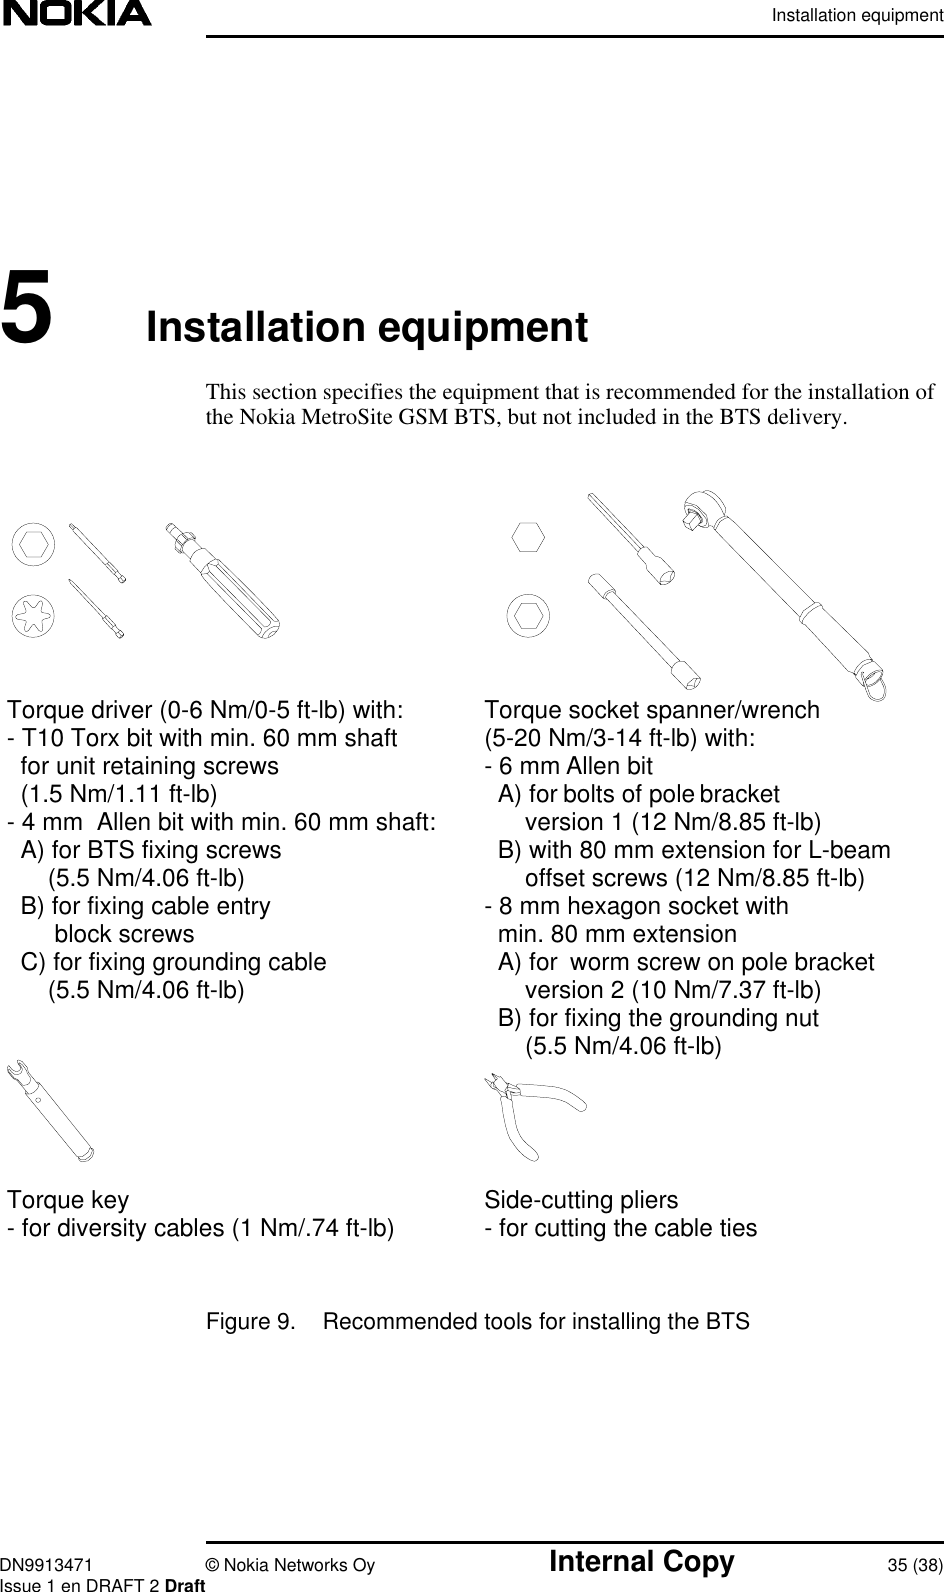 Installation equipmentDN9913471 © Nokia Networks Oy Internal Copy 35 (38)Issue 1 en DRAFT 2 Draft5Installation equipmentThis section specifies the equipment that is recommended for the installation ofthe Nokia MetroSite GSM BTS, but not included in the BTS delivery.Figure 9. Recommended tools for installing the BTSSide-cutting pliers- for cutting the cable tiesTorque socket spanner/wrench(5-20 Nm/3-14 ft-lb) with:- 6 mm Allen bit  A) for bolts of pole bracket      version 1 (12 Nm/8.85 ft-lb)  B) with 80 mm extension for L-beam      offset screws (12 Nm/8.85 ft-lb)- 8 mm hexagon socket with  min. 80 mm extension  A) for  worm screw on pole bracket      version 2 (10 Nm/7.37 ft-lb)  B) for fixing the grounding nut      (5.5 Nm/4.06 ft-lb)Torque key- for diversity cables (1 Nm/.74 ft-lb)Torque driver (0-6 Nm/0-5 ft-lb) with:- T10 Torx bit with min. 60 mm shaft  for unit retaining screws  (1.5 Nm/1.11 ft-lb)- 4 mm  Allen bit with min. 60 mm shaft:  A) for BTS fixing screws      (5.5 Nm/4.06 ft-lb)  B) for fixing cable entry       block screws  C) for fixing grounding cable      (5.5 Nm/4.06 ft-lb)